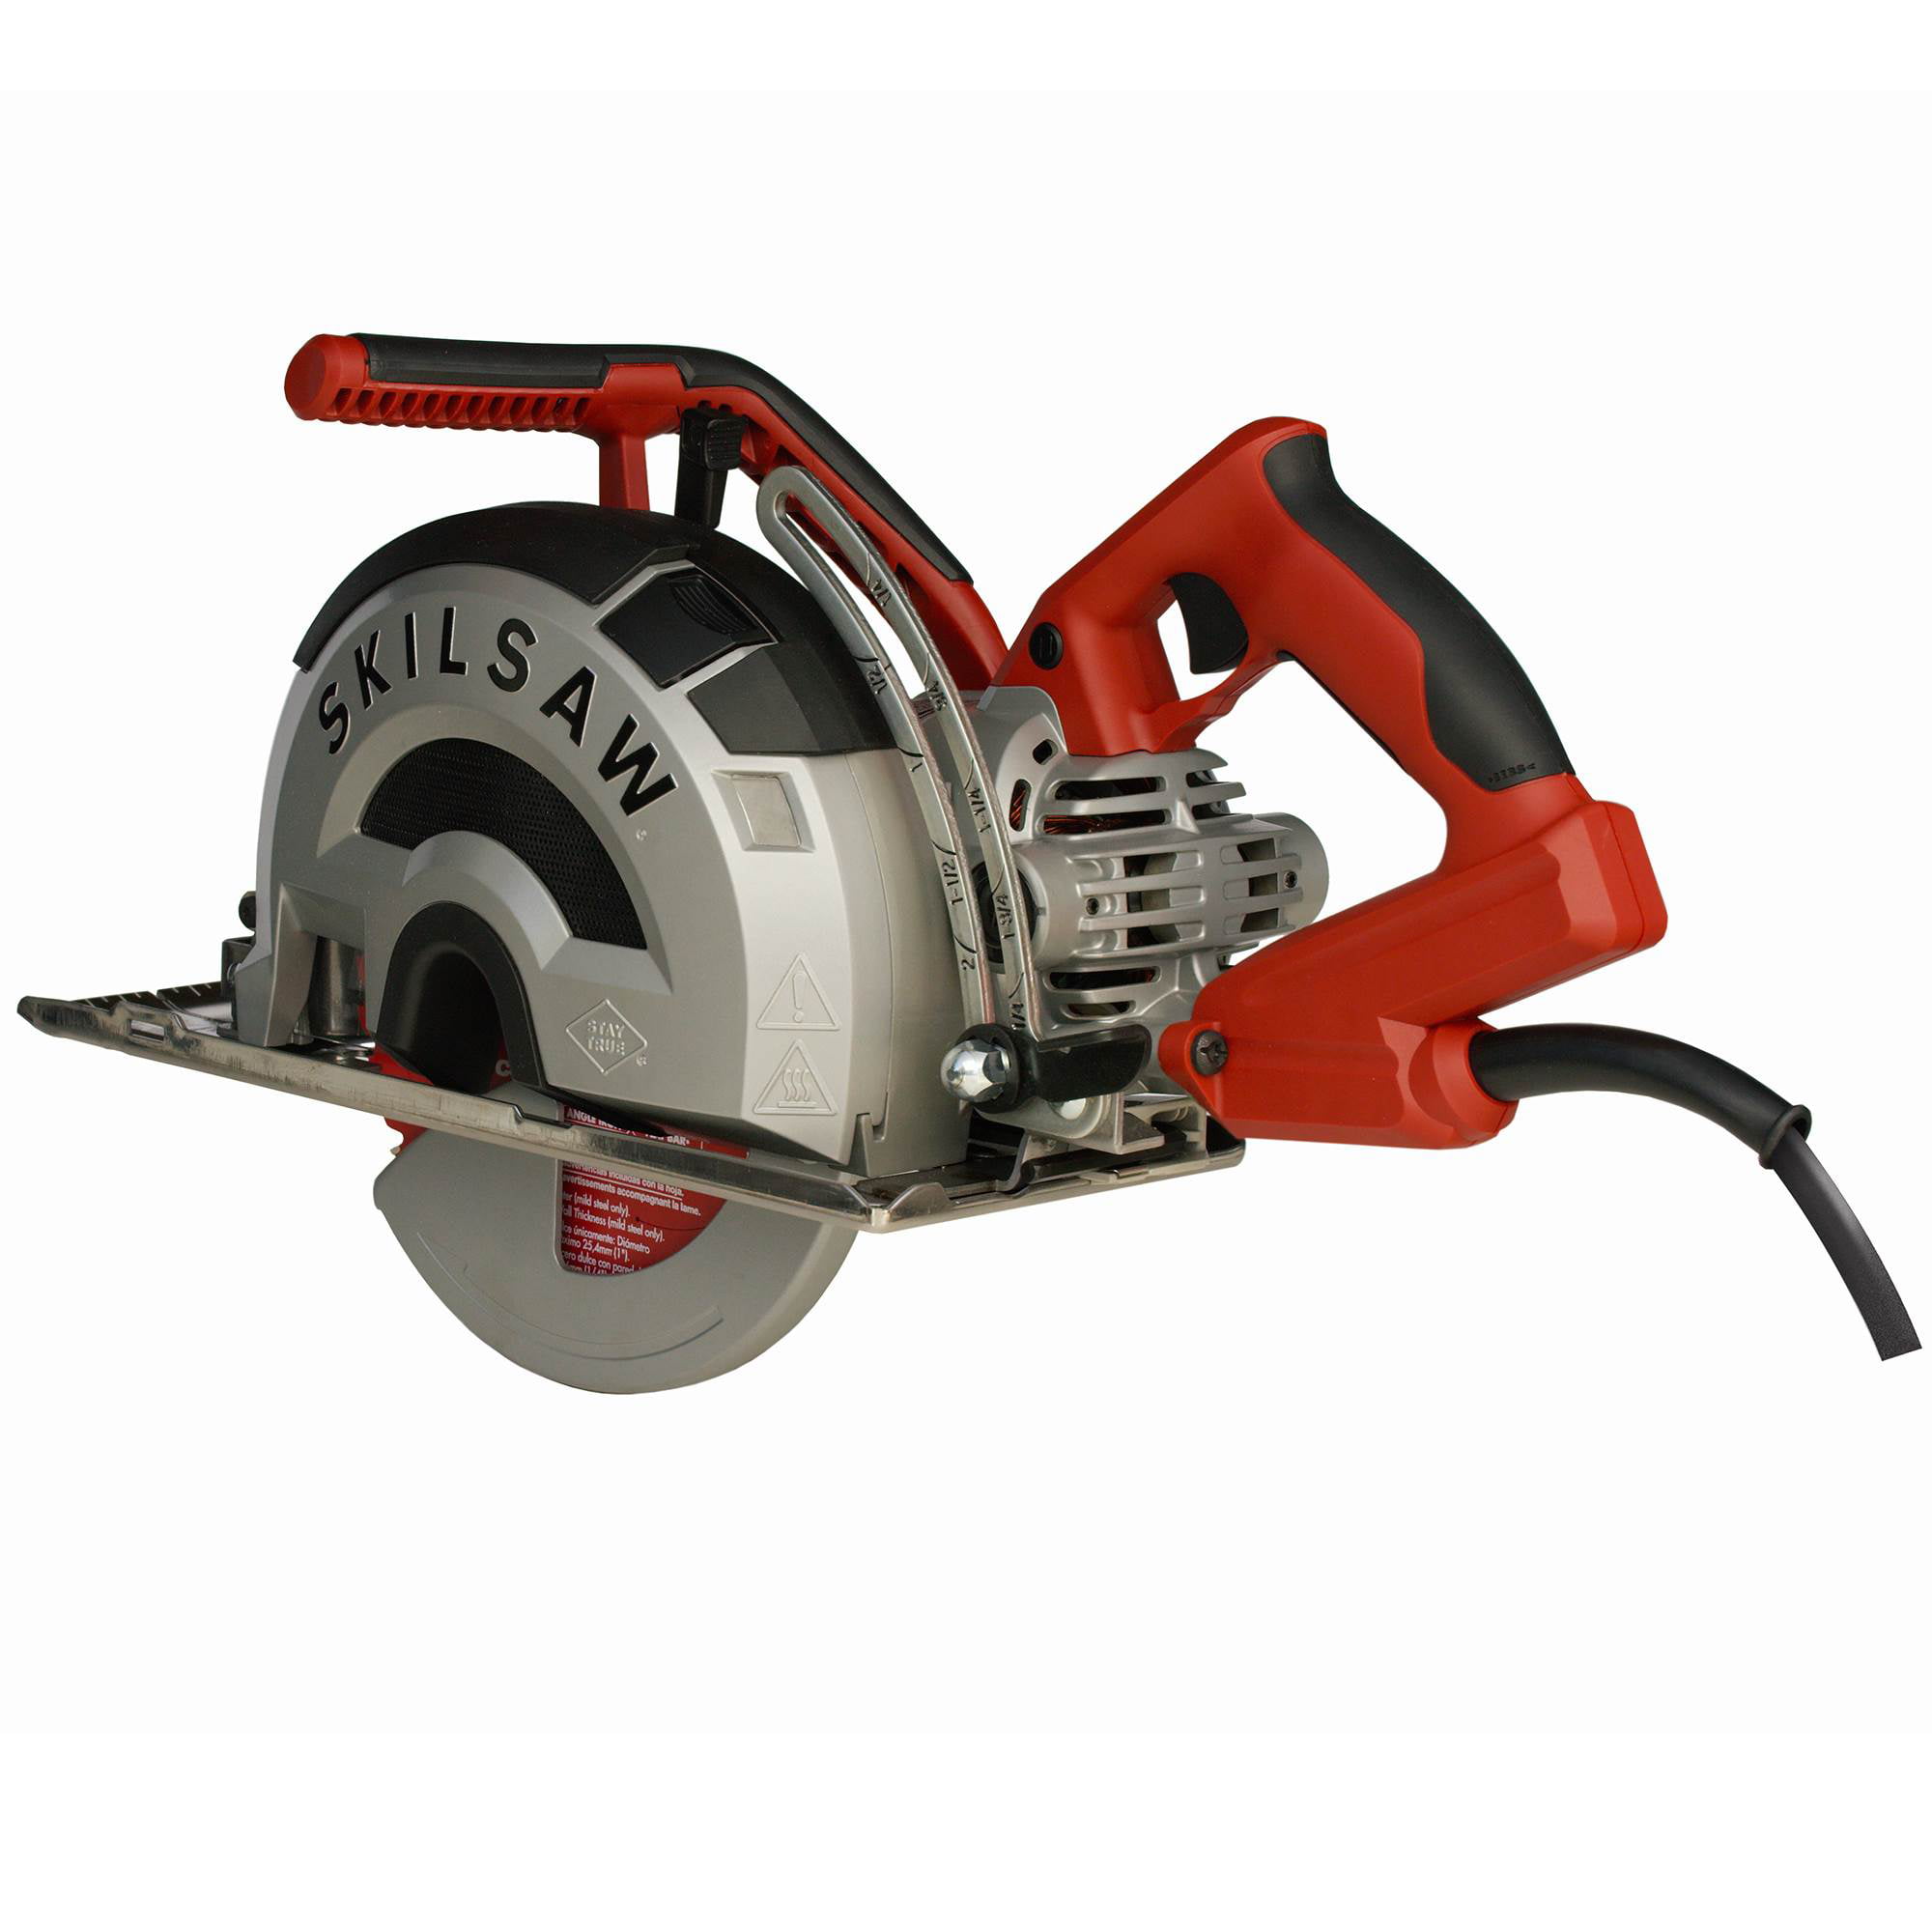 SKIL OUTLAW SPT78MMC-22 Circular Saw 120 V 15 A in Dia Blade Stainless  Steel